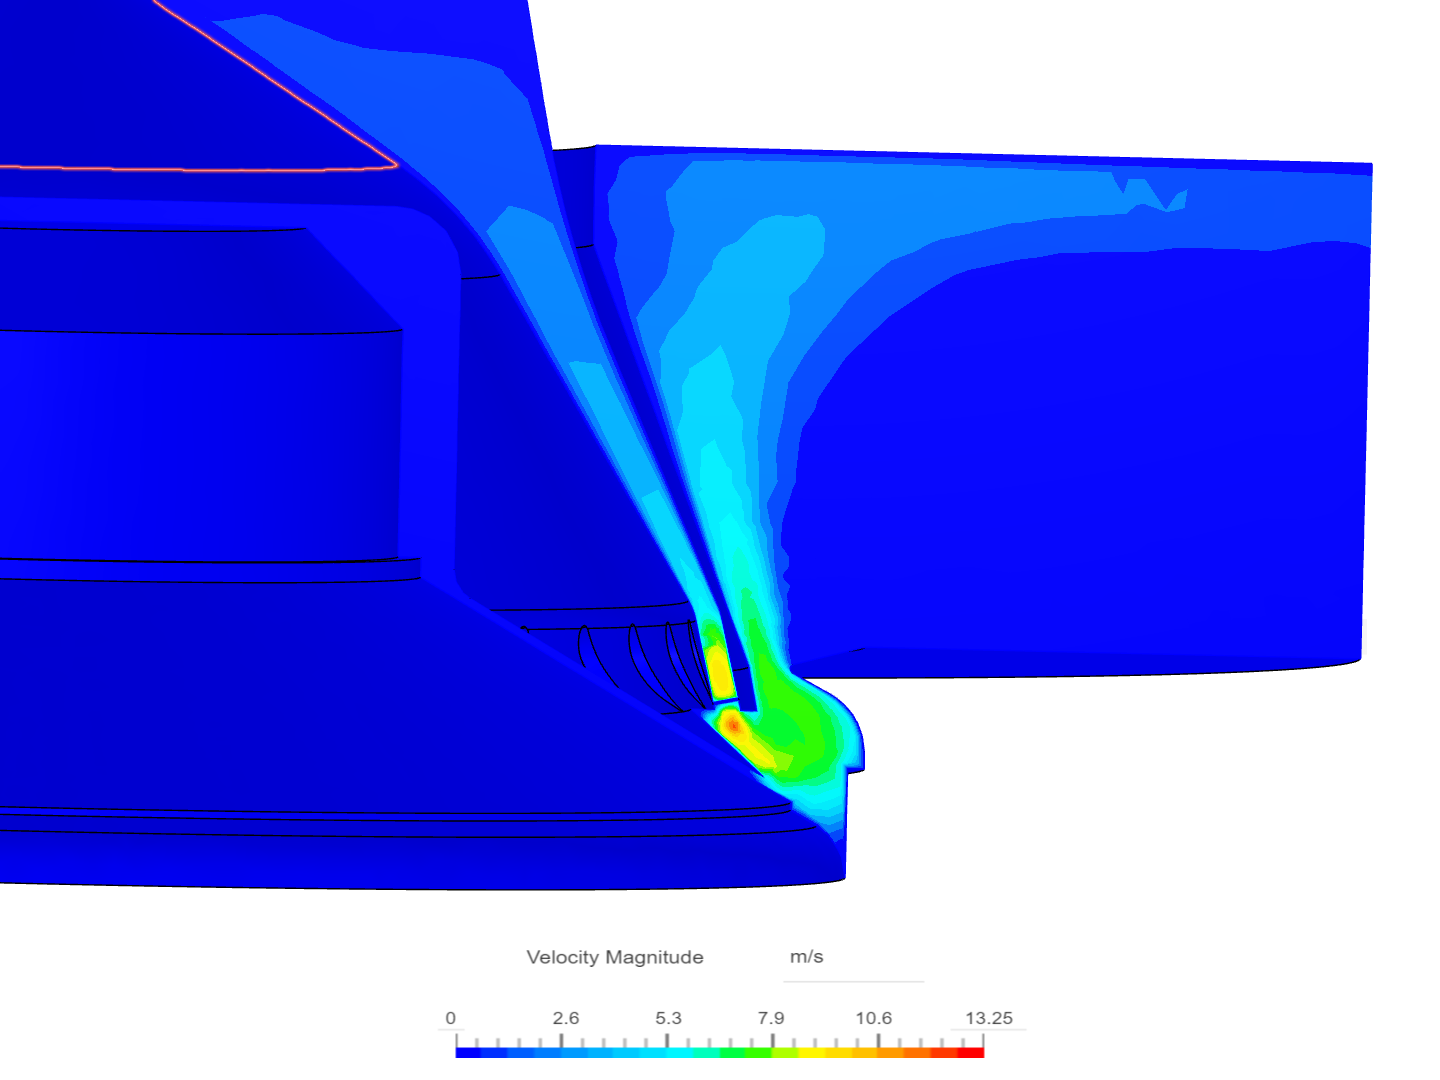 nzzl_cfd image